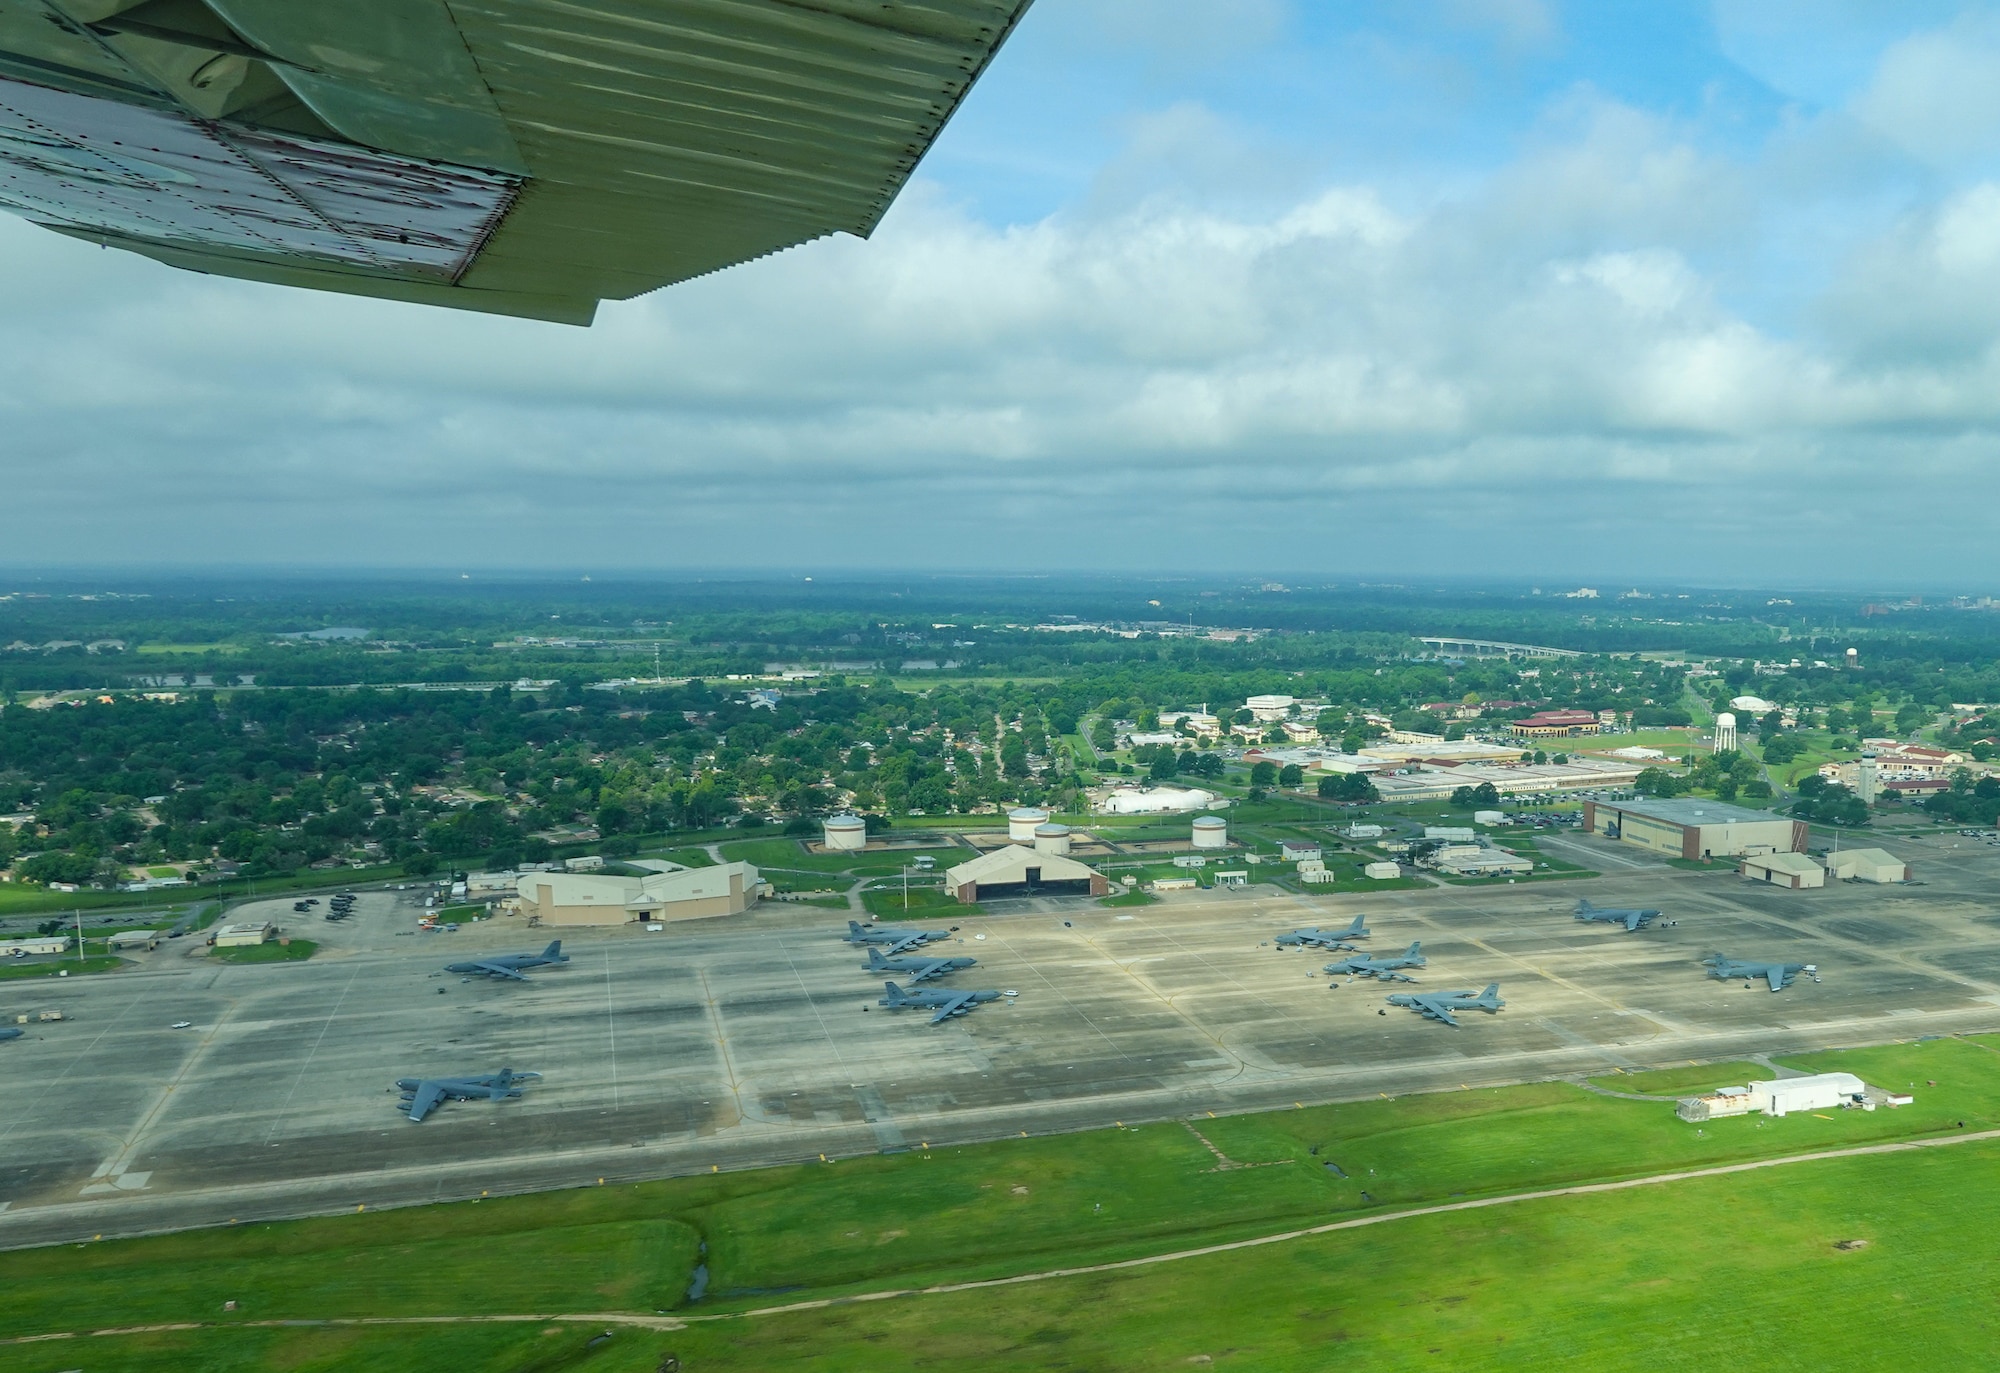 A Civil Air Patrol Cessna 182 Skylane, flies over the Barksdale flightline during a Mid-Air Collision Avoidance safety flight at Barksdale Air Force Base, Louisiana, May 28, 2021. MACA visits are conducted at various airports within a 50 nautical mile radius of Barksdale in which the CAP is tasked to move military personnel to help support Air Force mission safety requirements in different locations. (Courtesy photo by Capt. Dustin Martin)